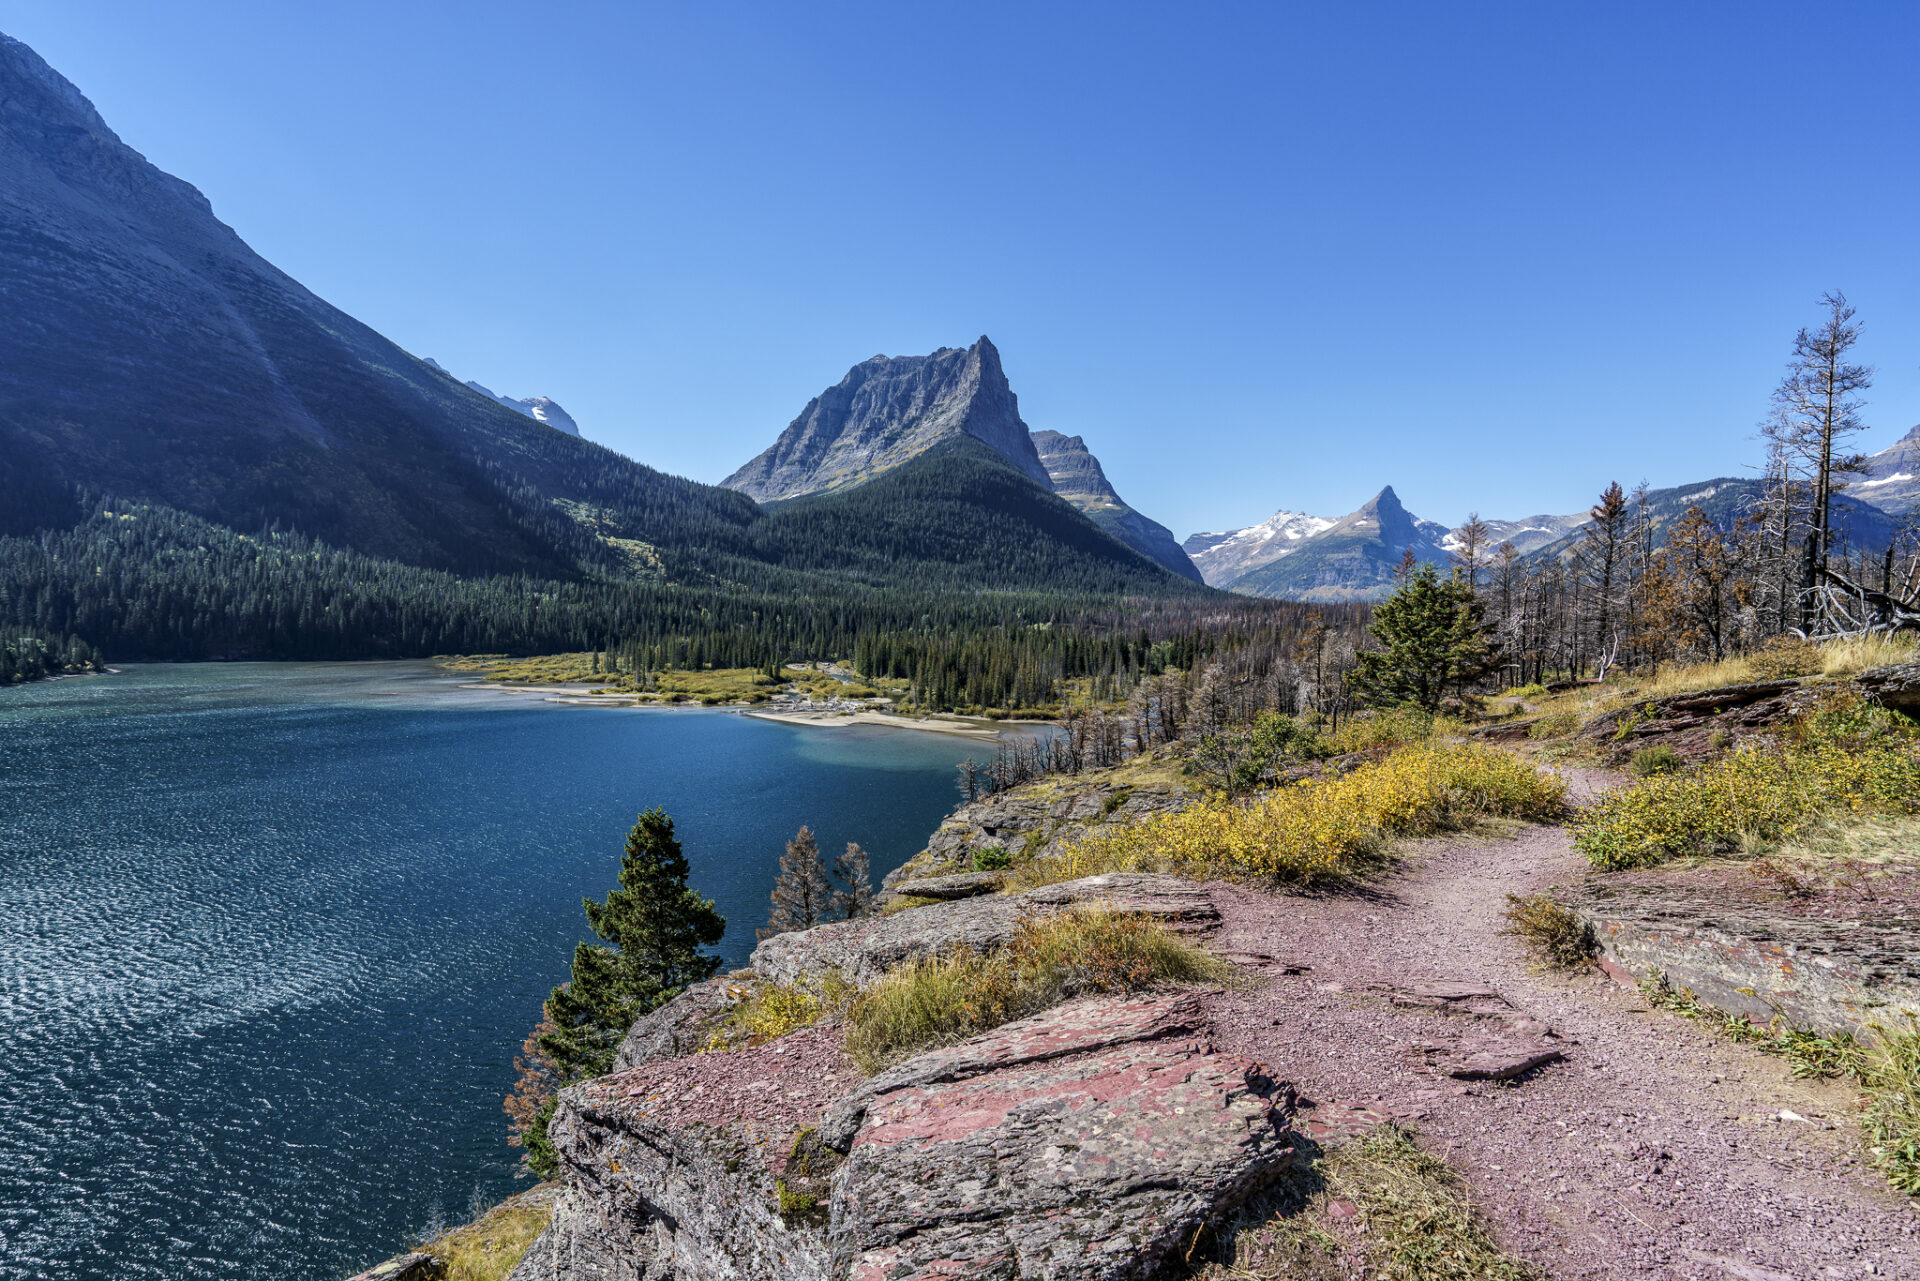 Dusty Star Mountain Towers over Saint Mary Lake in Glacier National Park